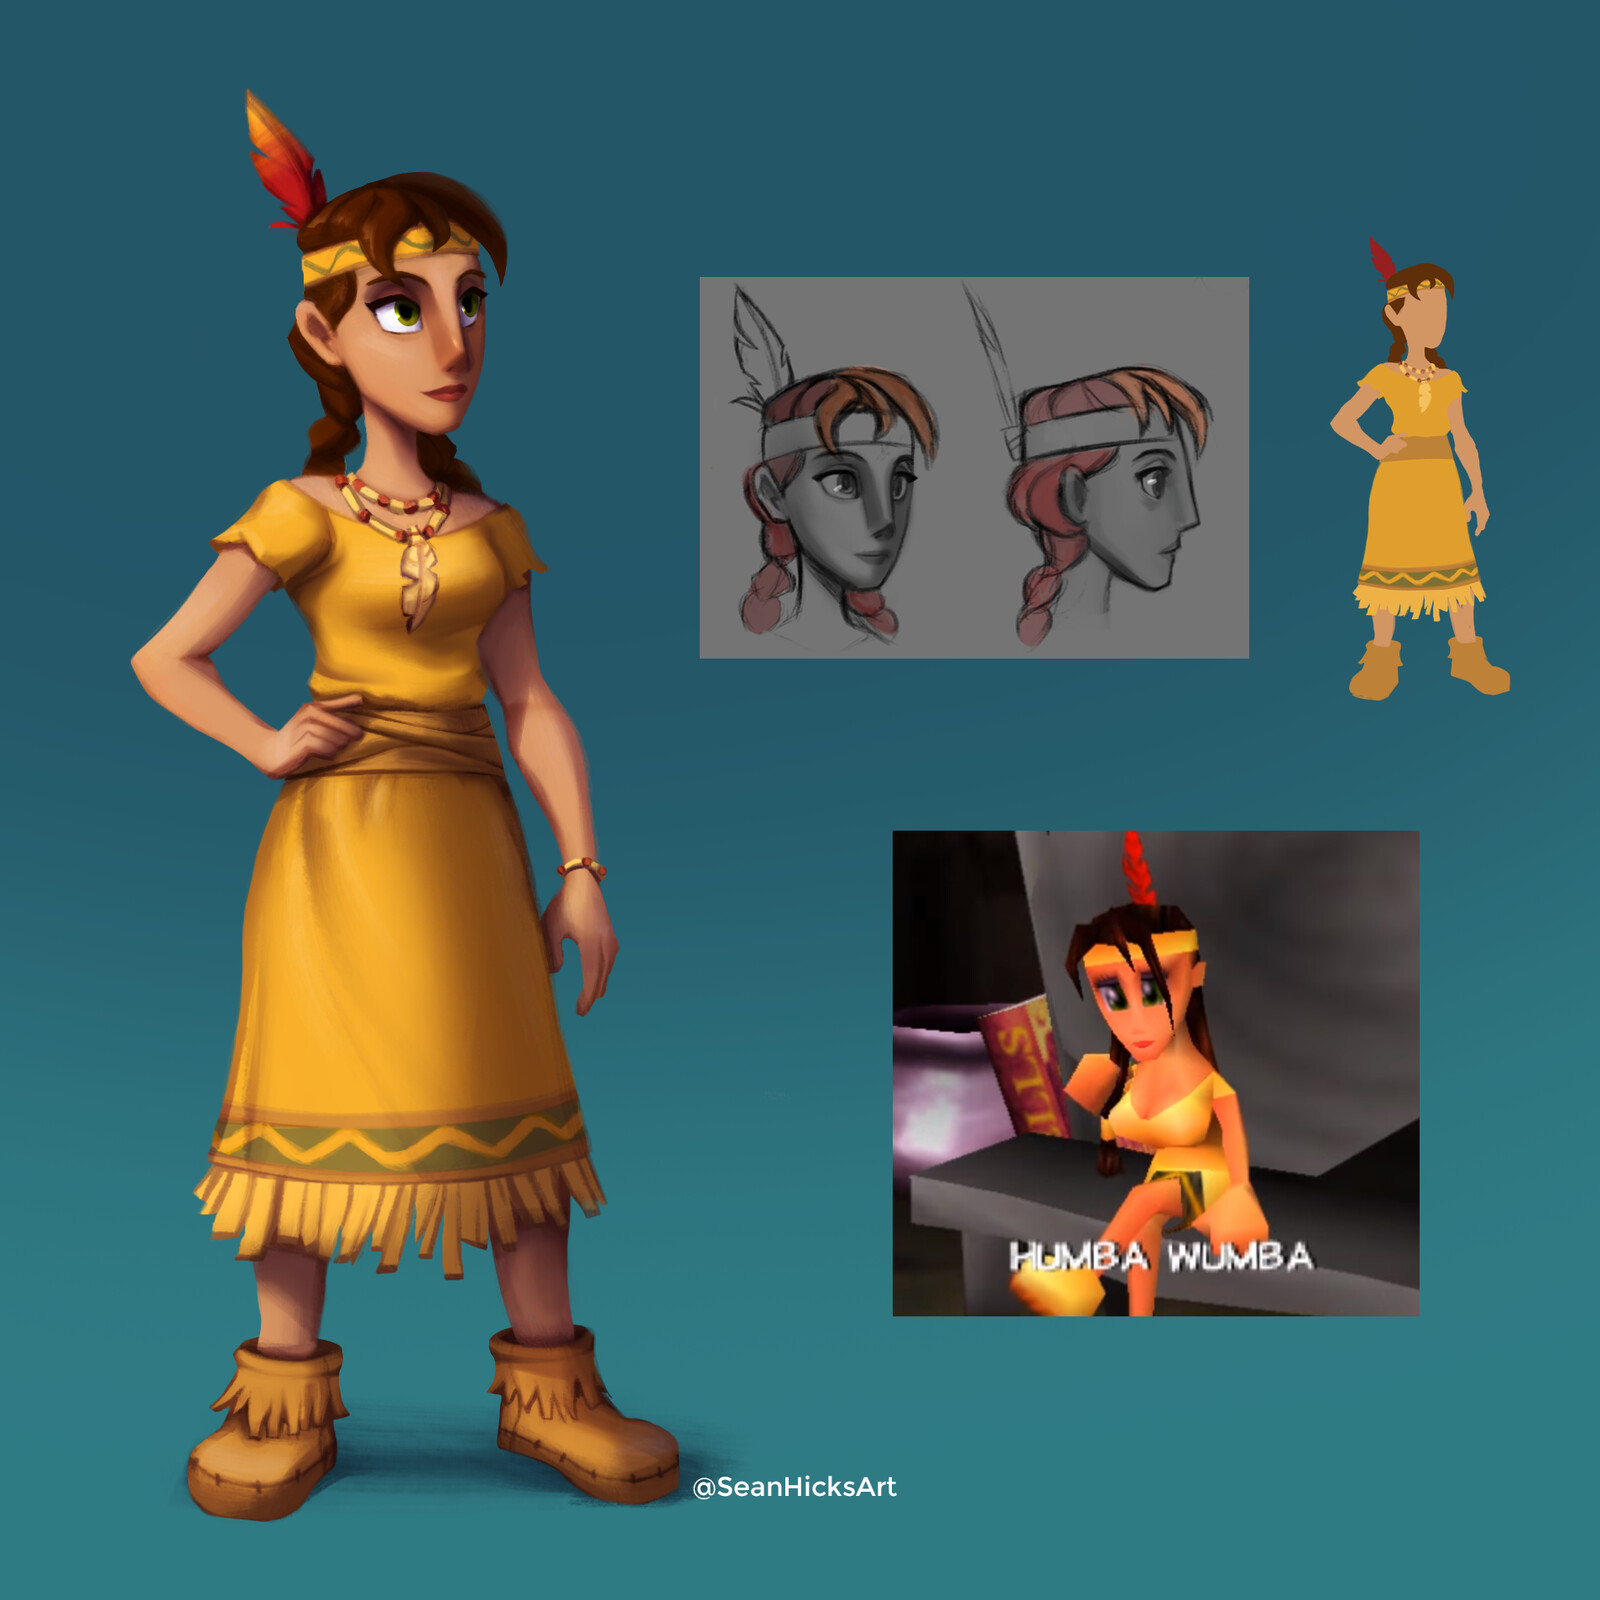 Humba Wumba render with head sketches and reference from the Nintendo 64 game